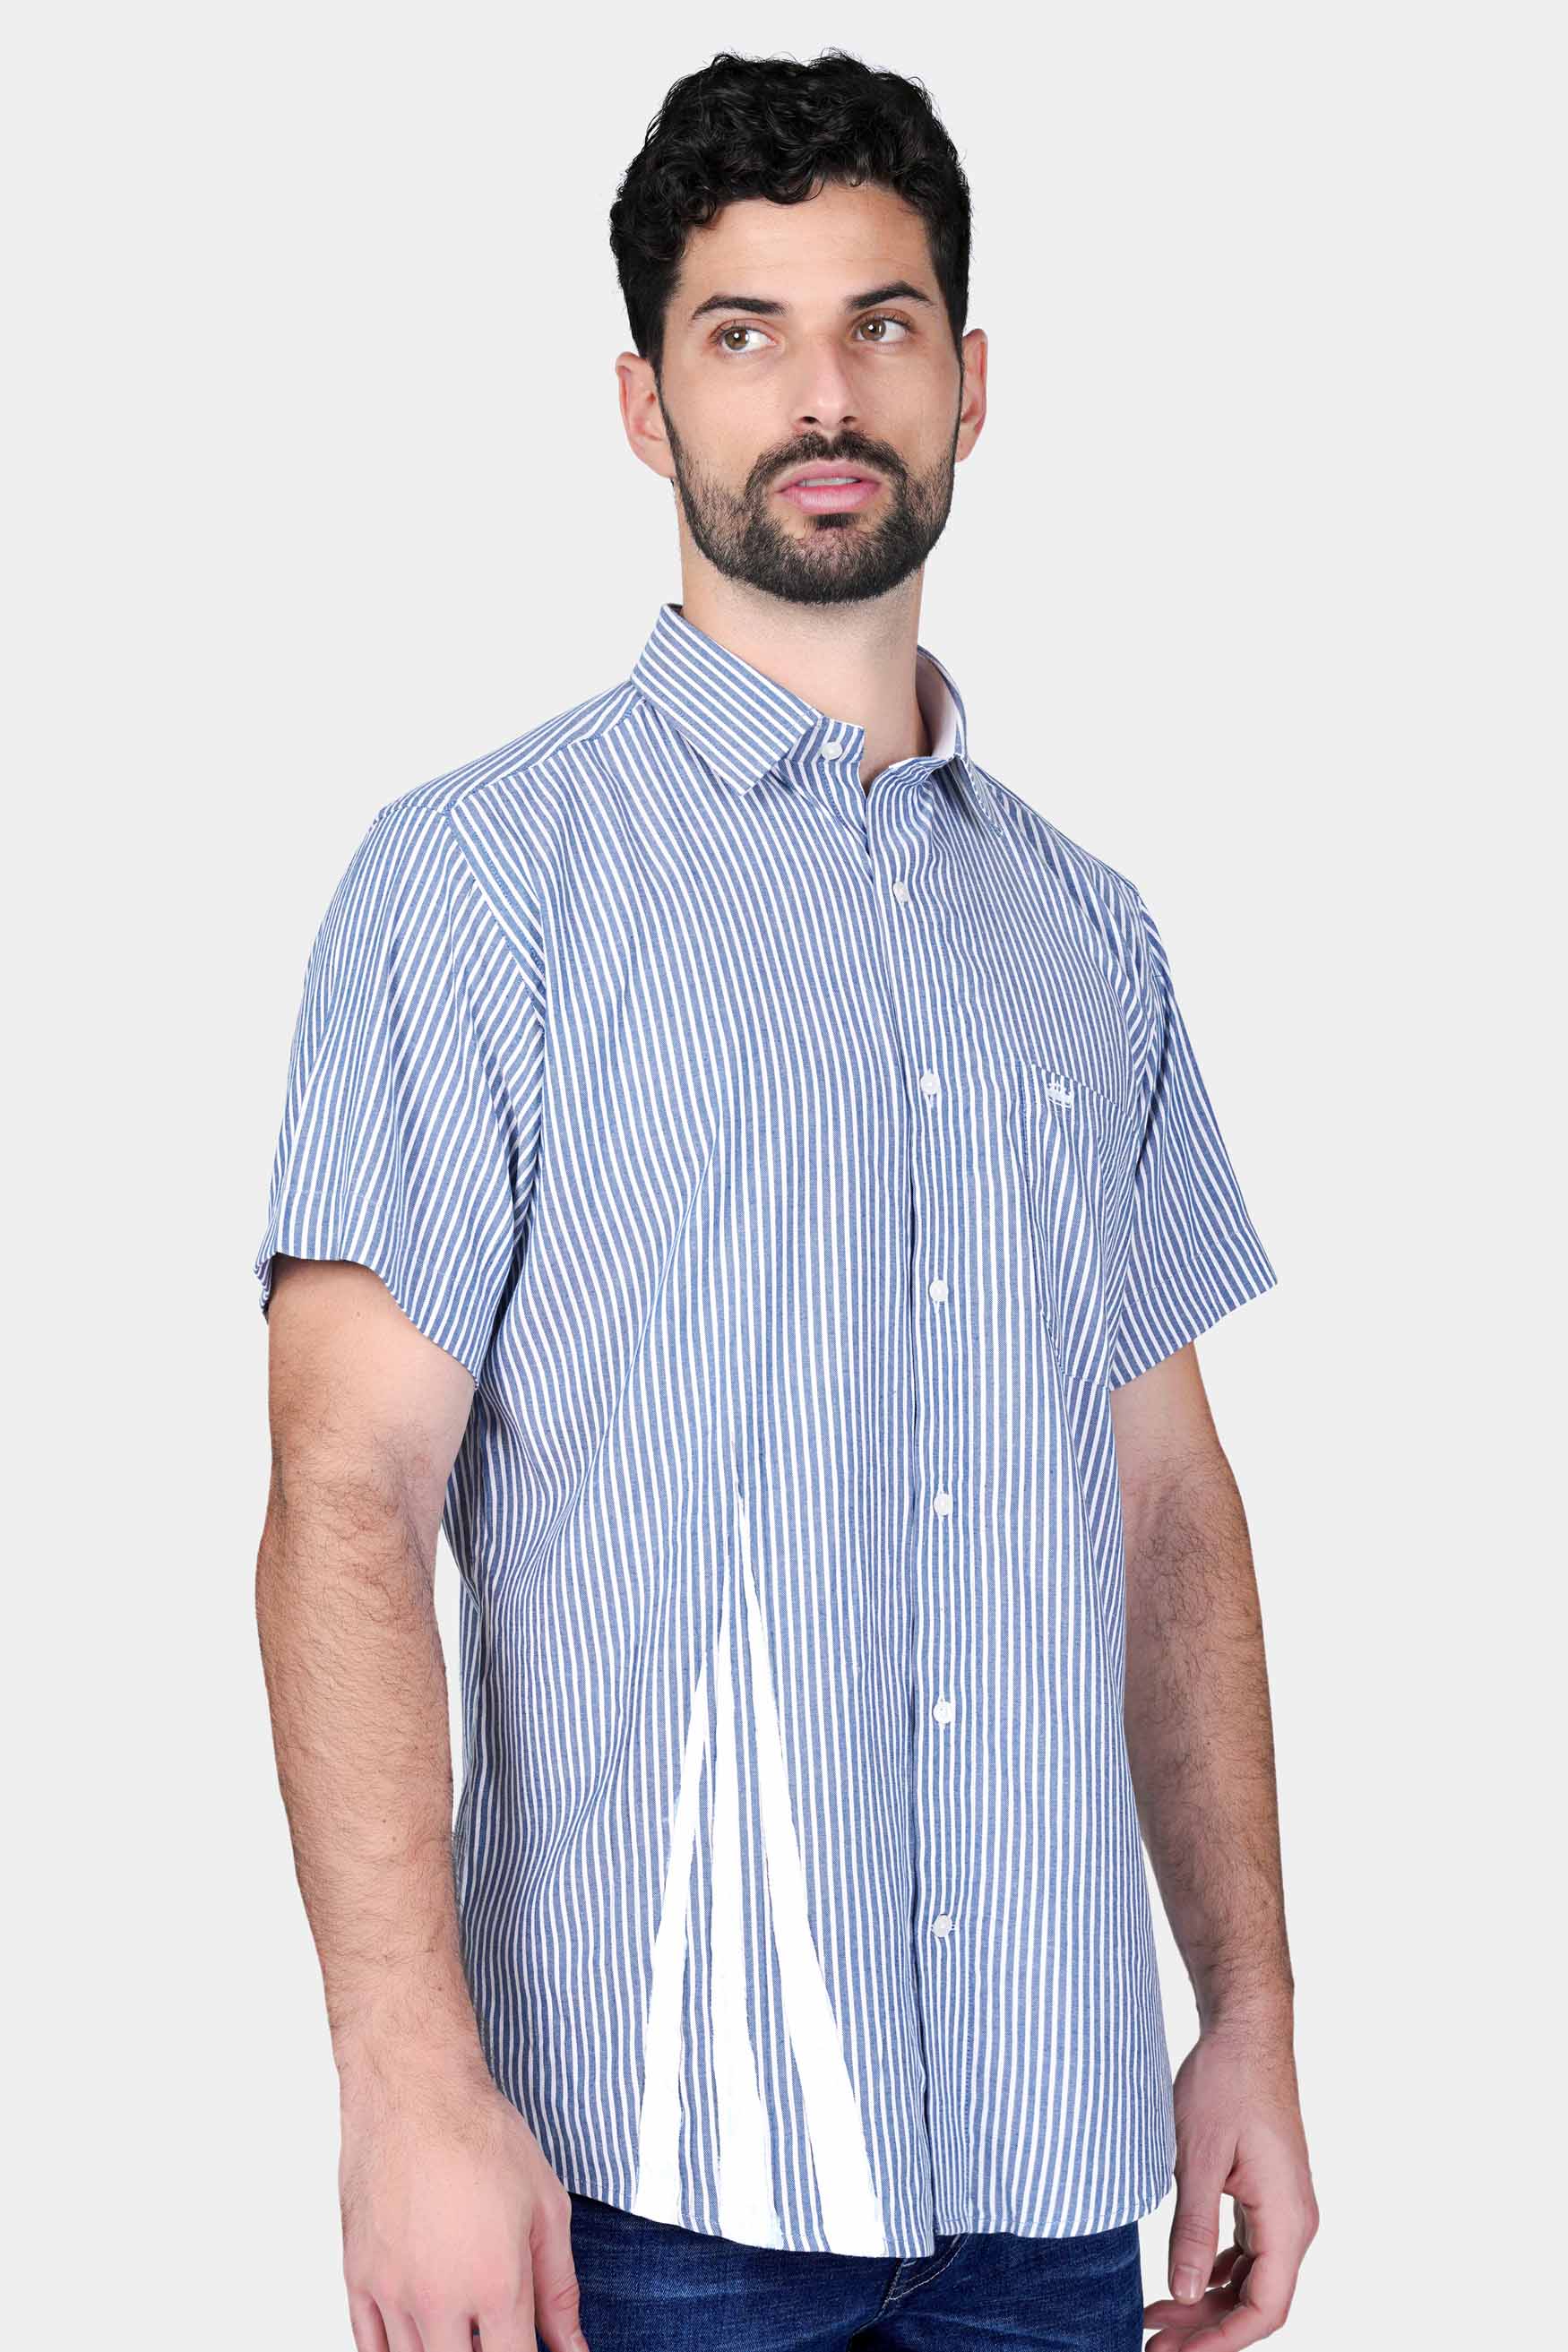 Yonder Blue Striped with White Hand Painted Royal Oxford Designer Shirt 6345-CP-SS-ART-38, 6345-CP-SS-ART-39, 6345-CP-SS-ART-40, 6345-CP-SS-ART-42, 6345-CP-SS-ART-44, 6345-CP-SS-ART-46, 6345-CP-SS-ART-48, 6345-CP-SS-ART-50, 6345-CP-SS-ART-52